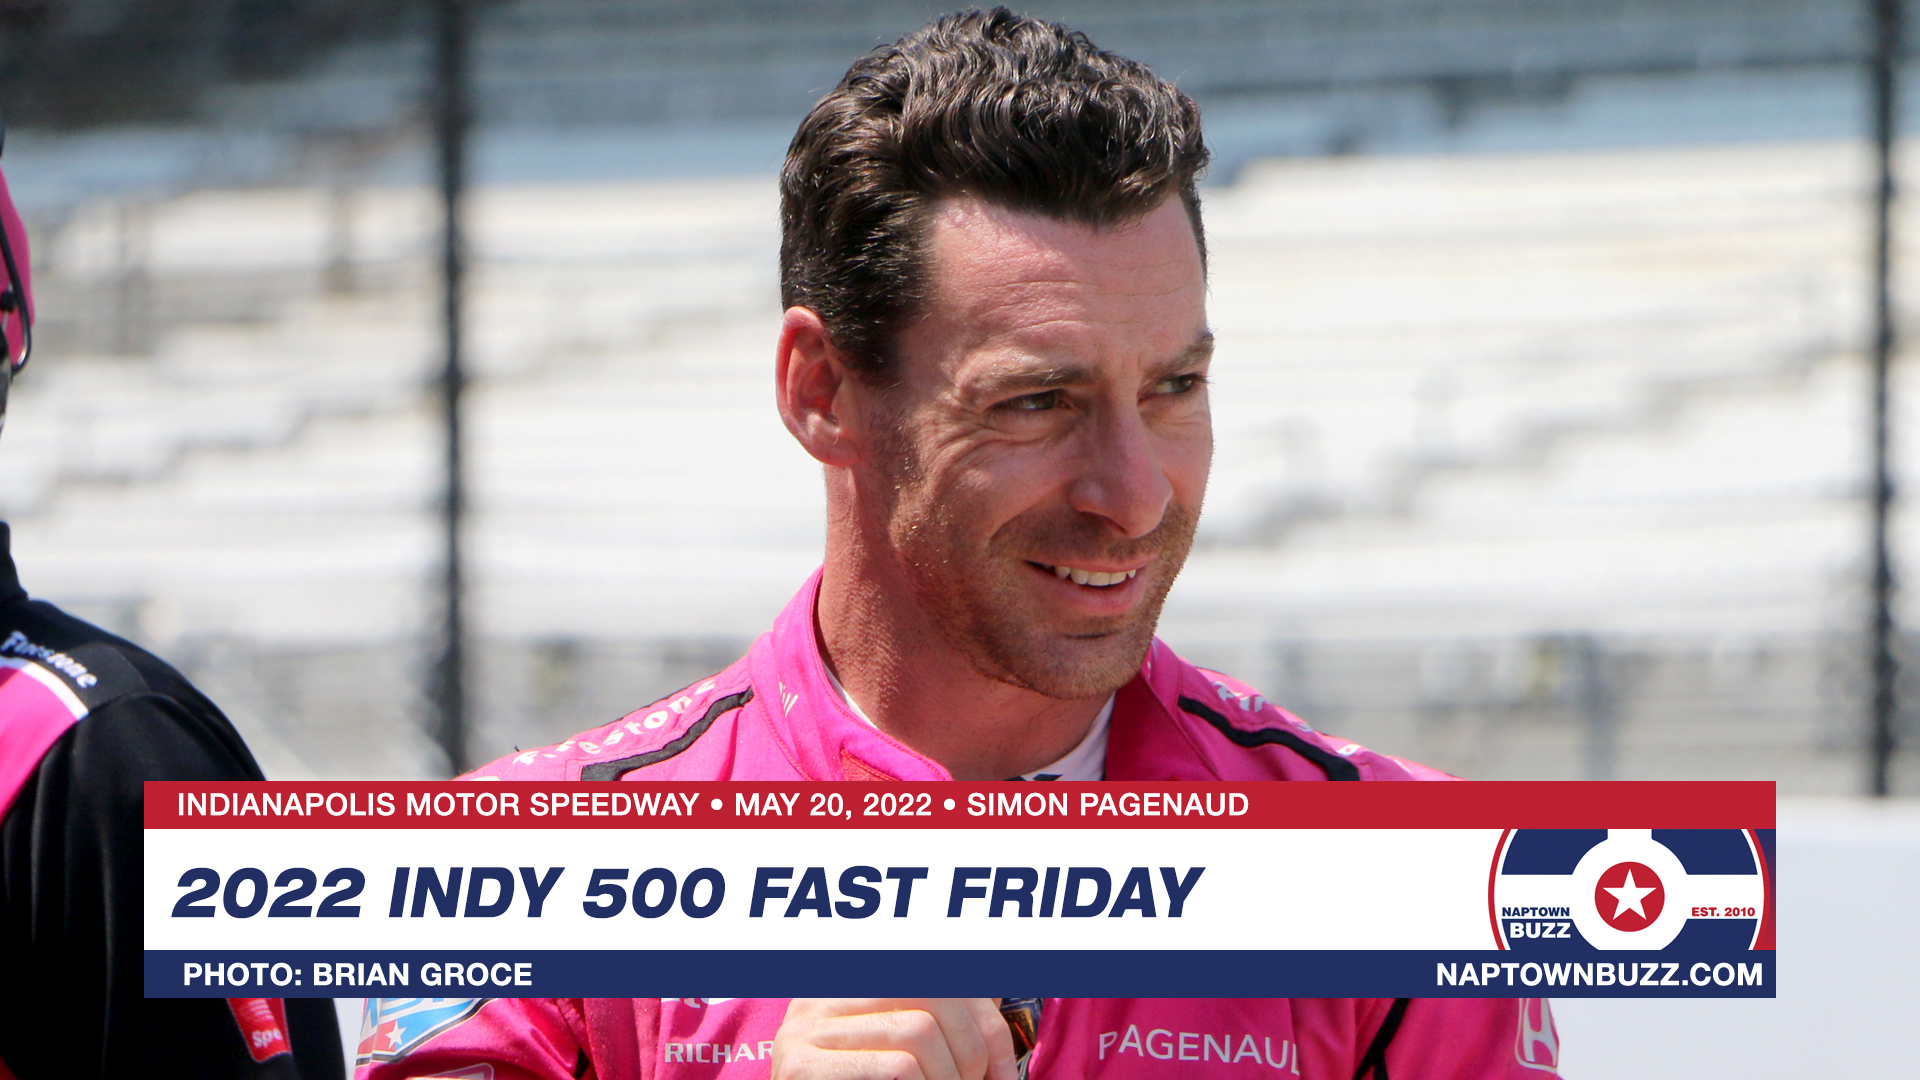 Simon Pagenaud on Indy 500 Fast Friday Practice at Indianapolis Motor Speedway on May 20, 2022